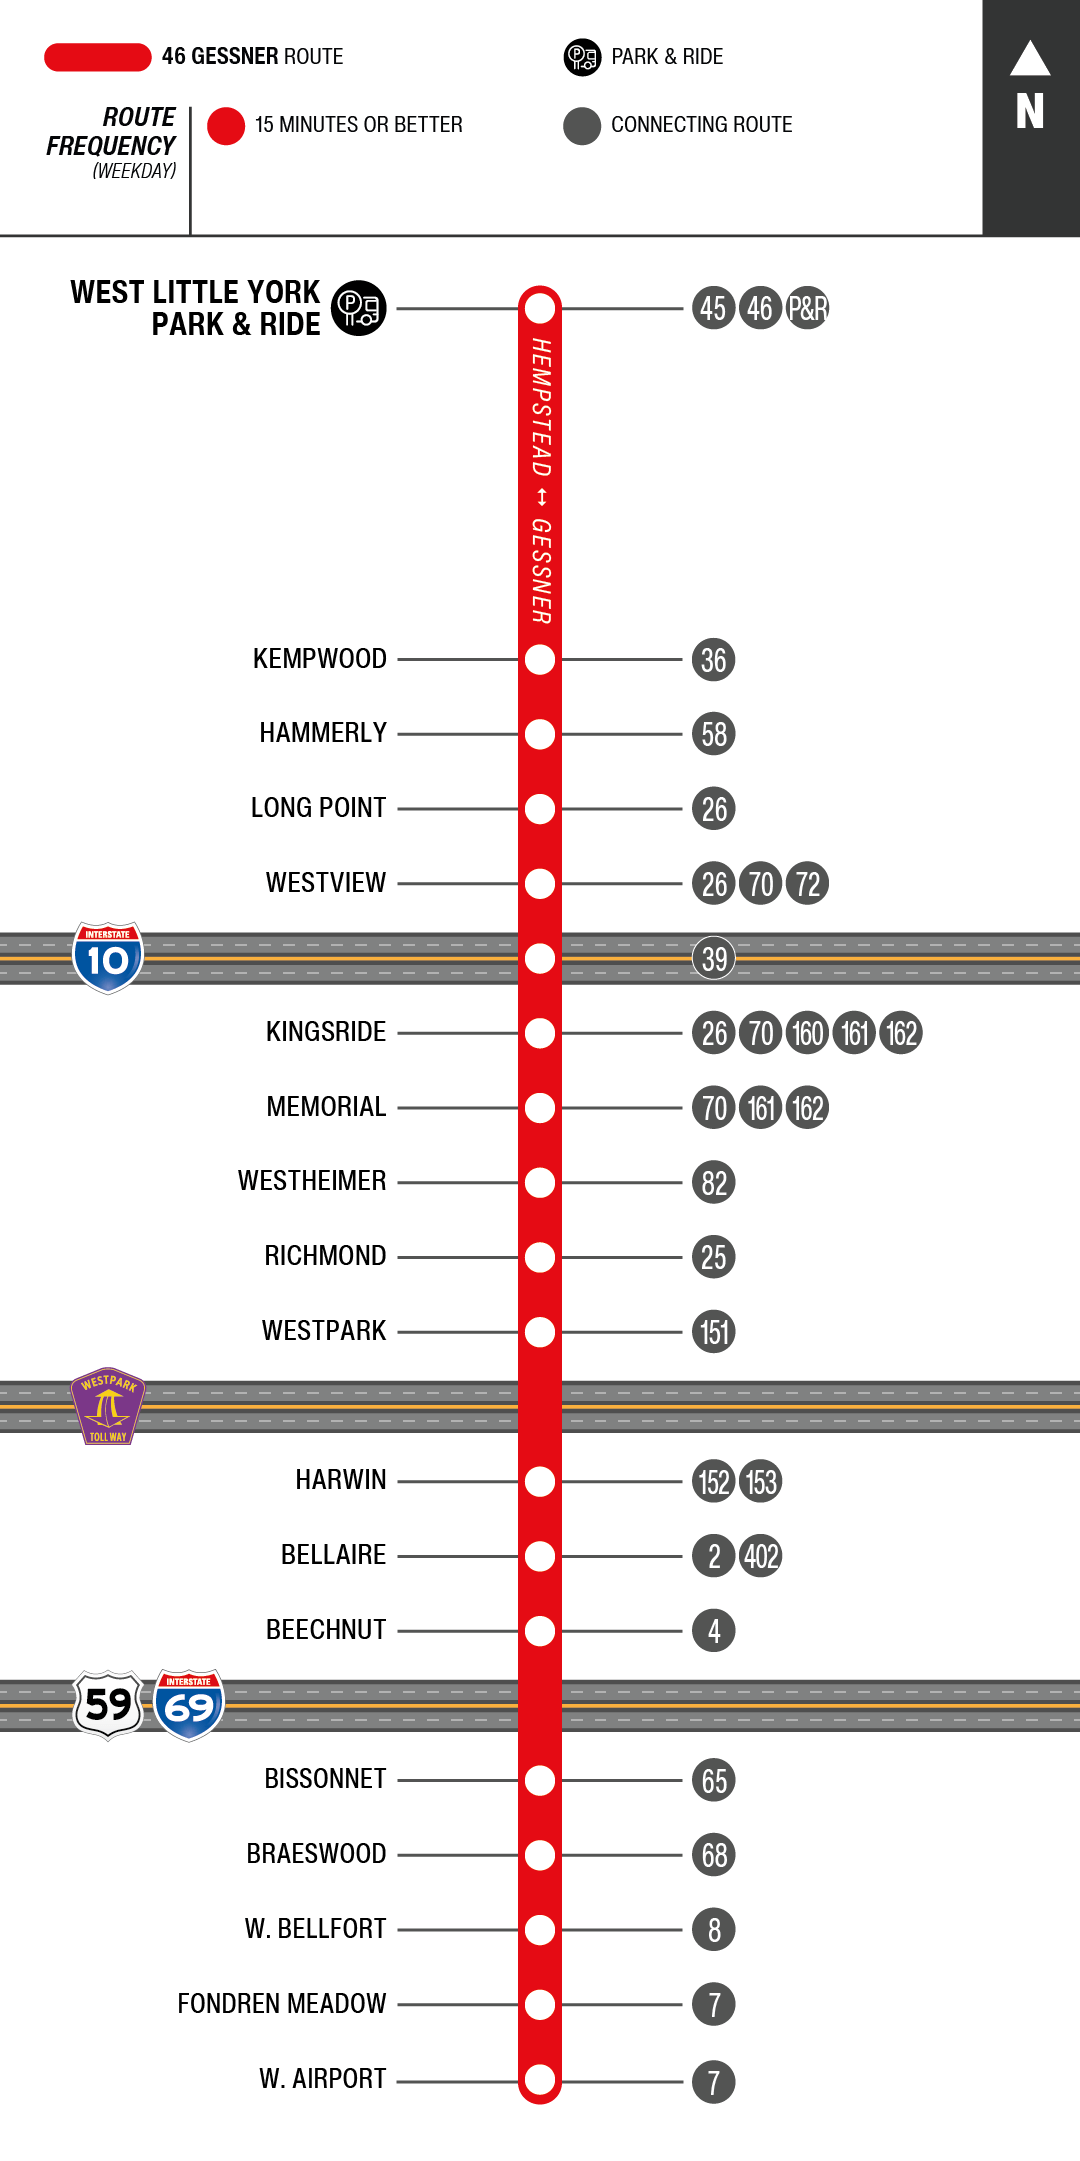 Route map for 46 Gessner bus